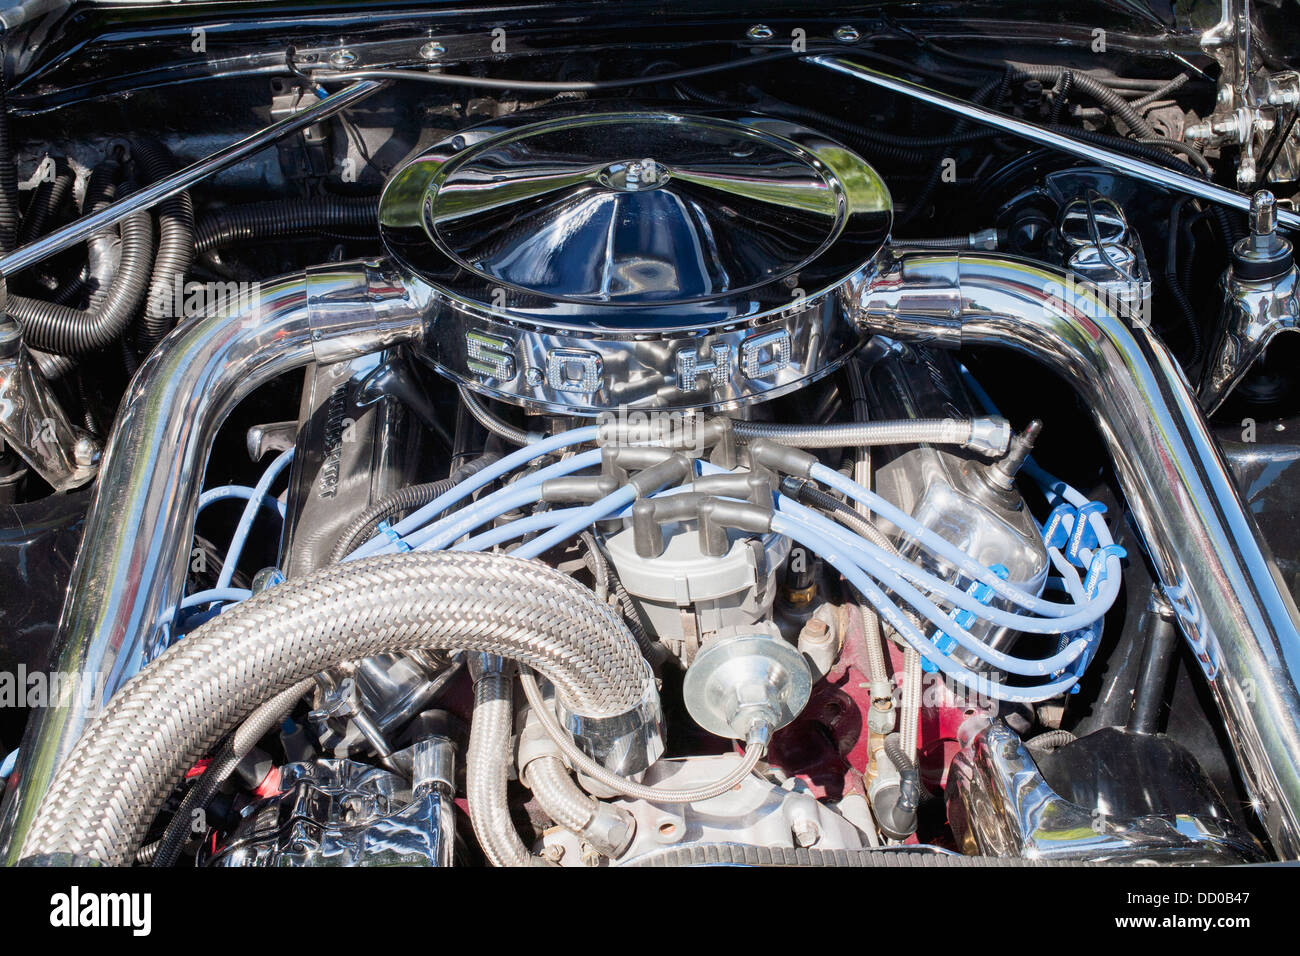 Engine In A Hot Rod Car; Marieville, Quebec, Canada Stock Photo